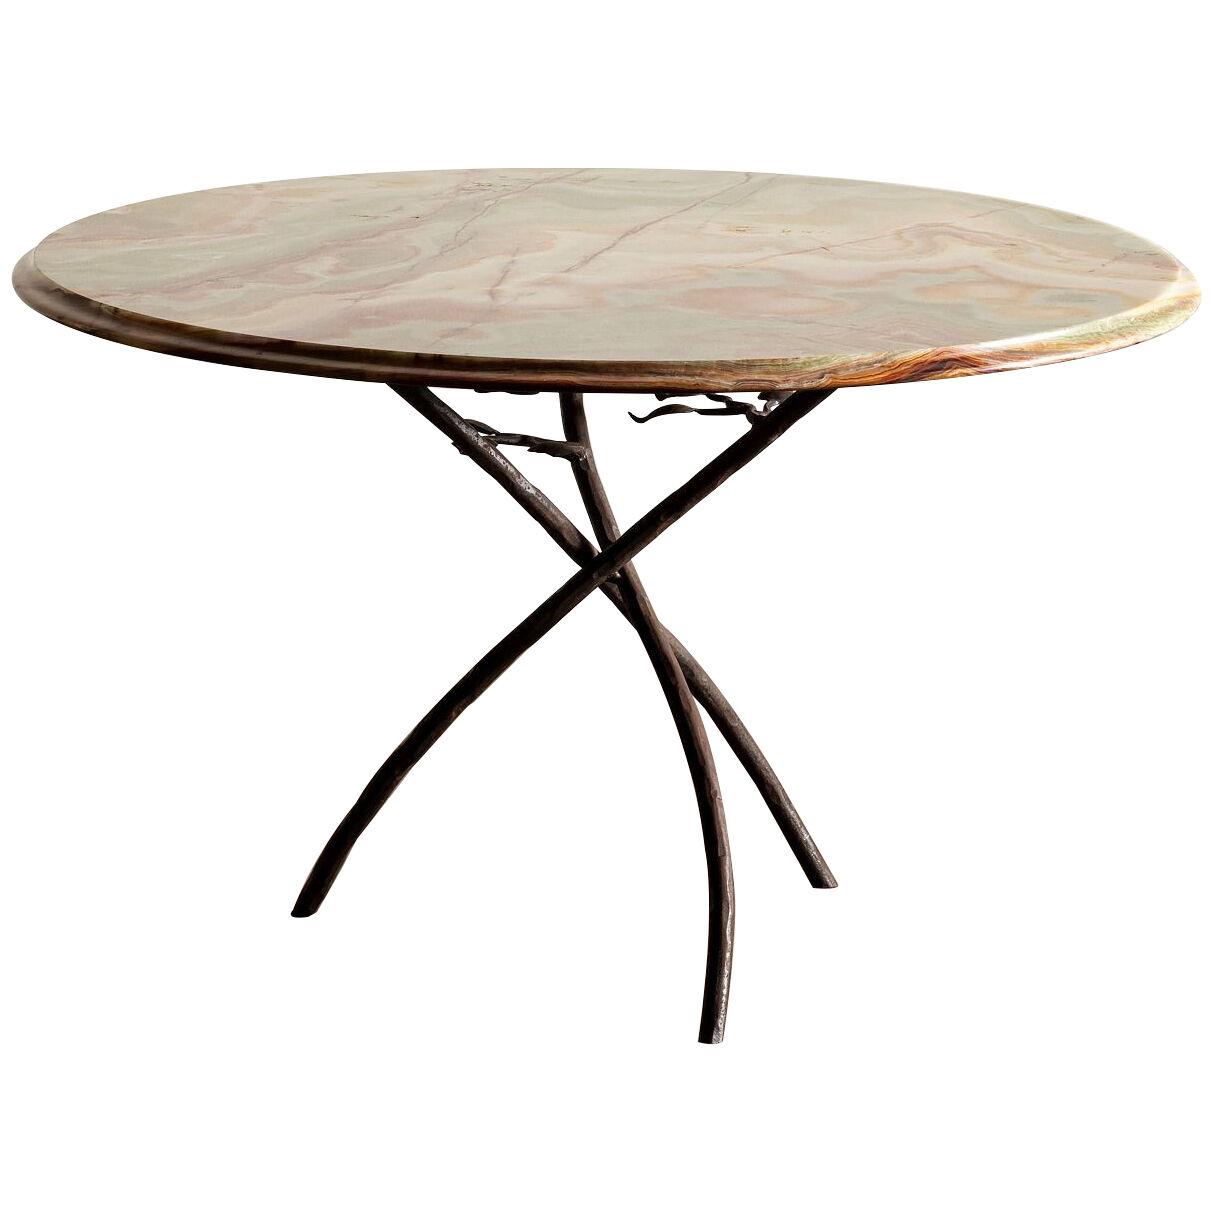 Studio Table with Forged Floral Form Steel Base and Onyx Top, Italy1960s